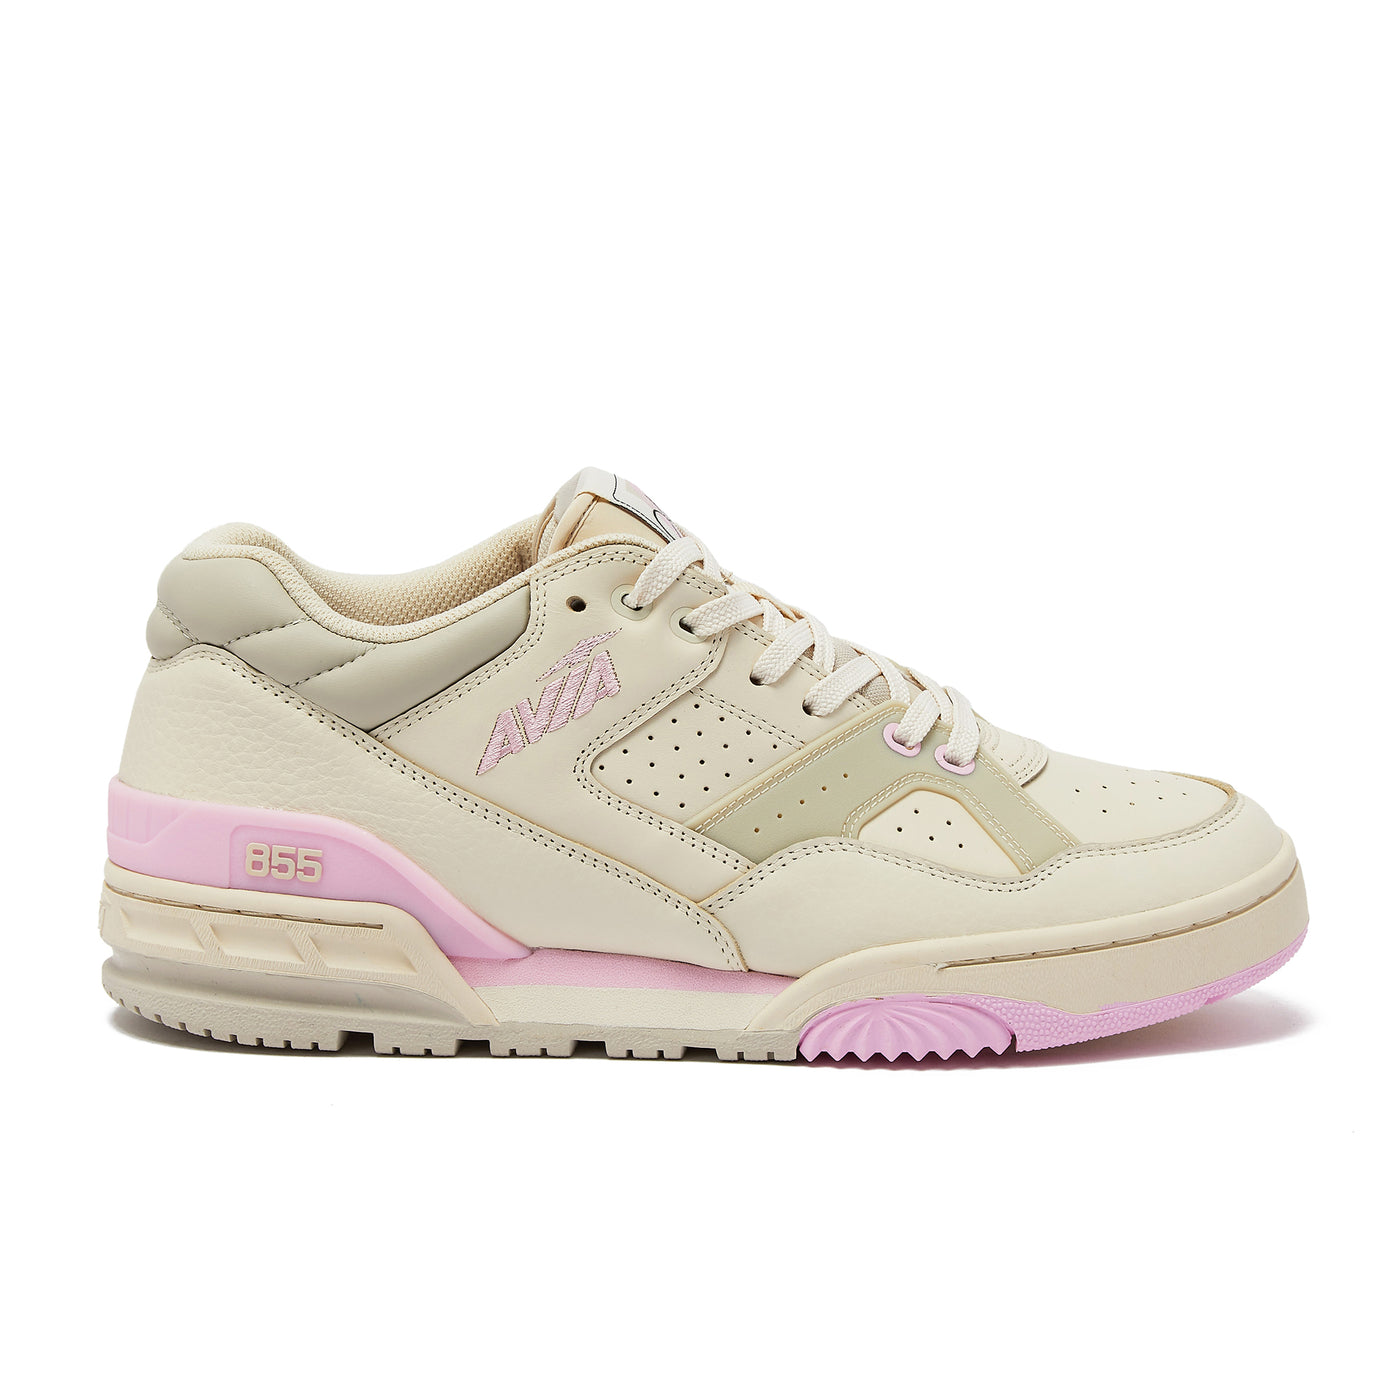 HUSH x Avia Legacy 855 Low "Cotton Candy Scoops"